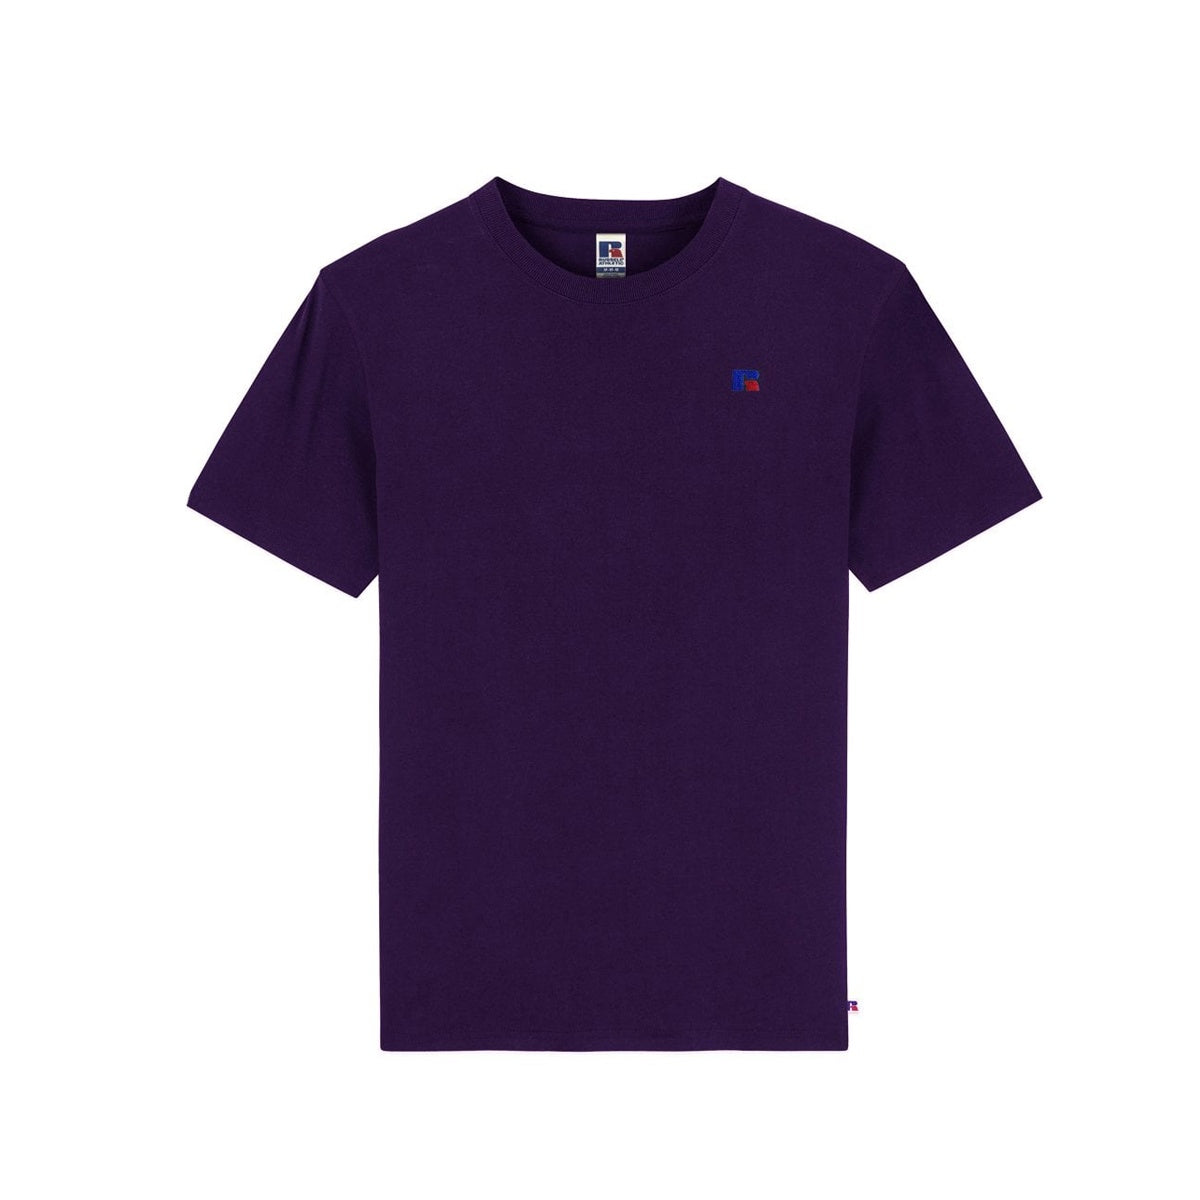 Russell Athletic Baseliners S/S Tee Shirt Deep Purple